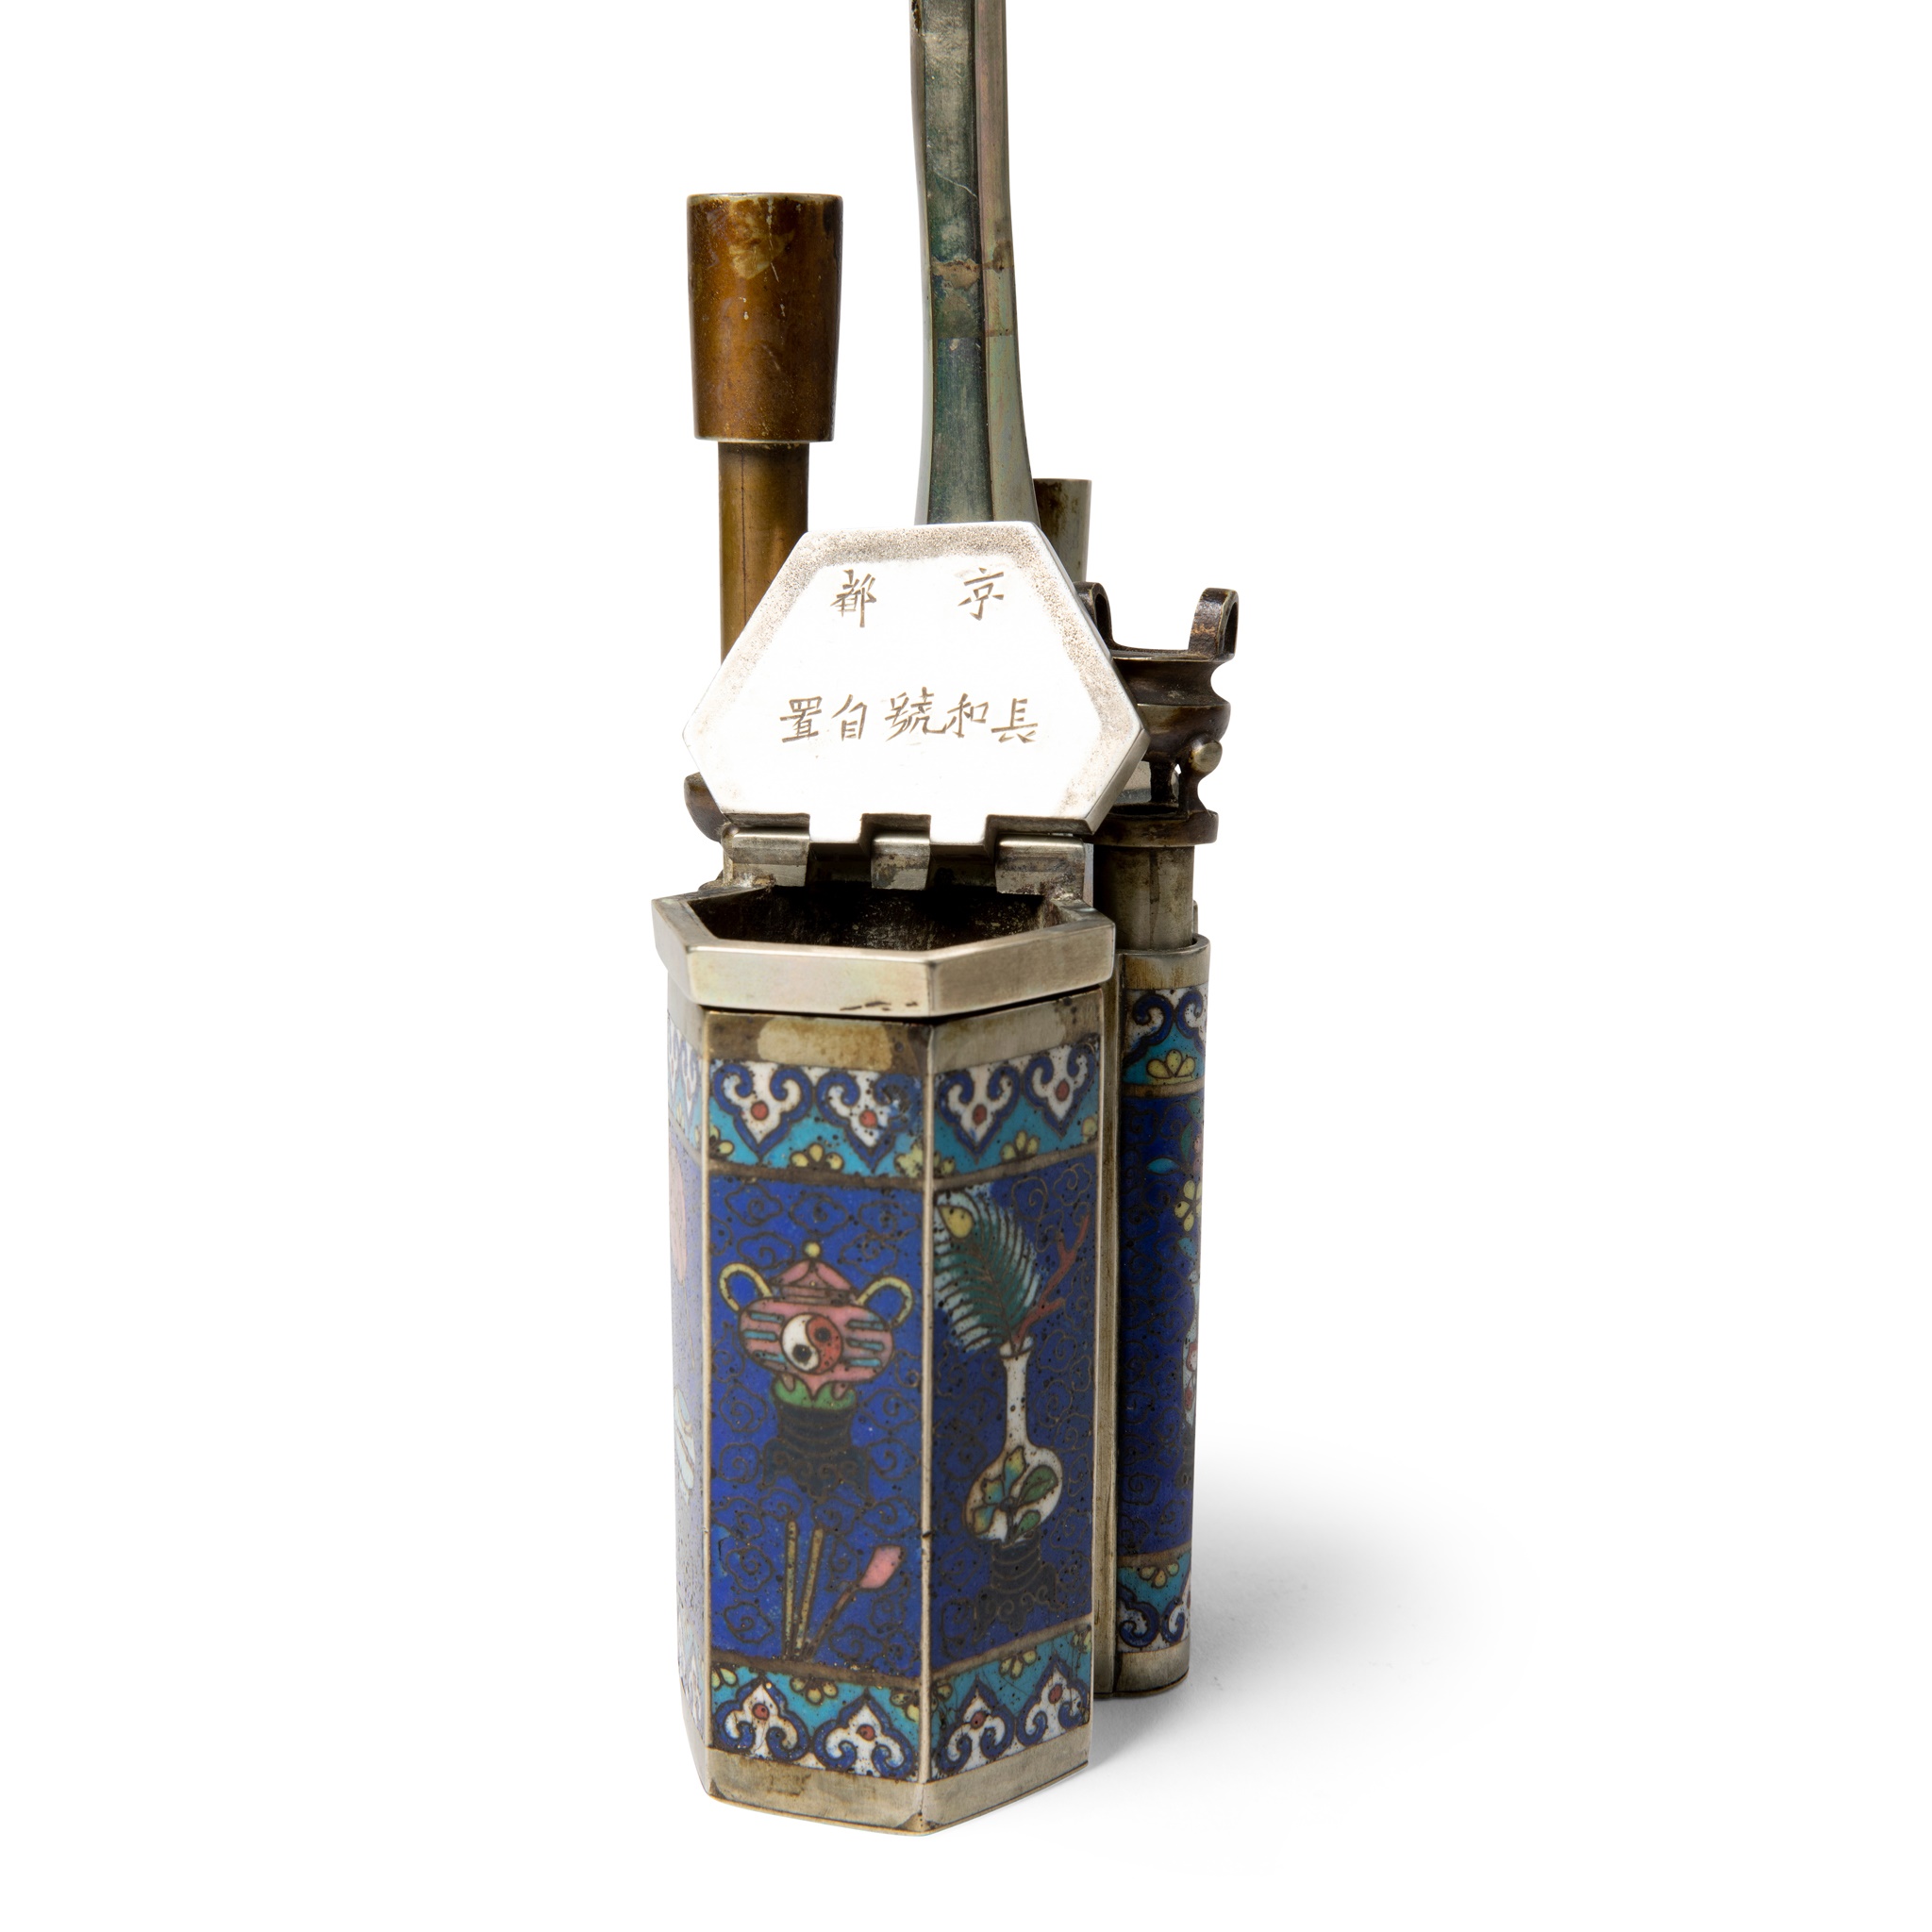 PAKTONG CLOISONNÉ ENAMEL WATER PIPE LATE QING DYNASTY-REPUBLIC PERIOD, 19TH-20TH CENTURY - Image 2 of 2